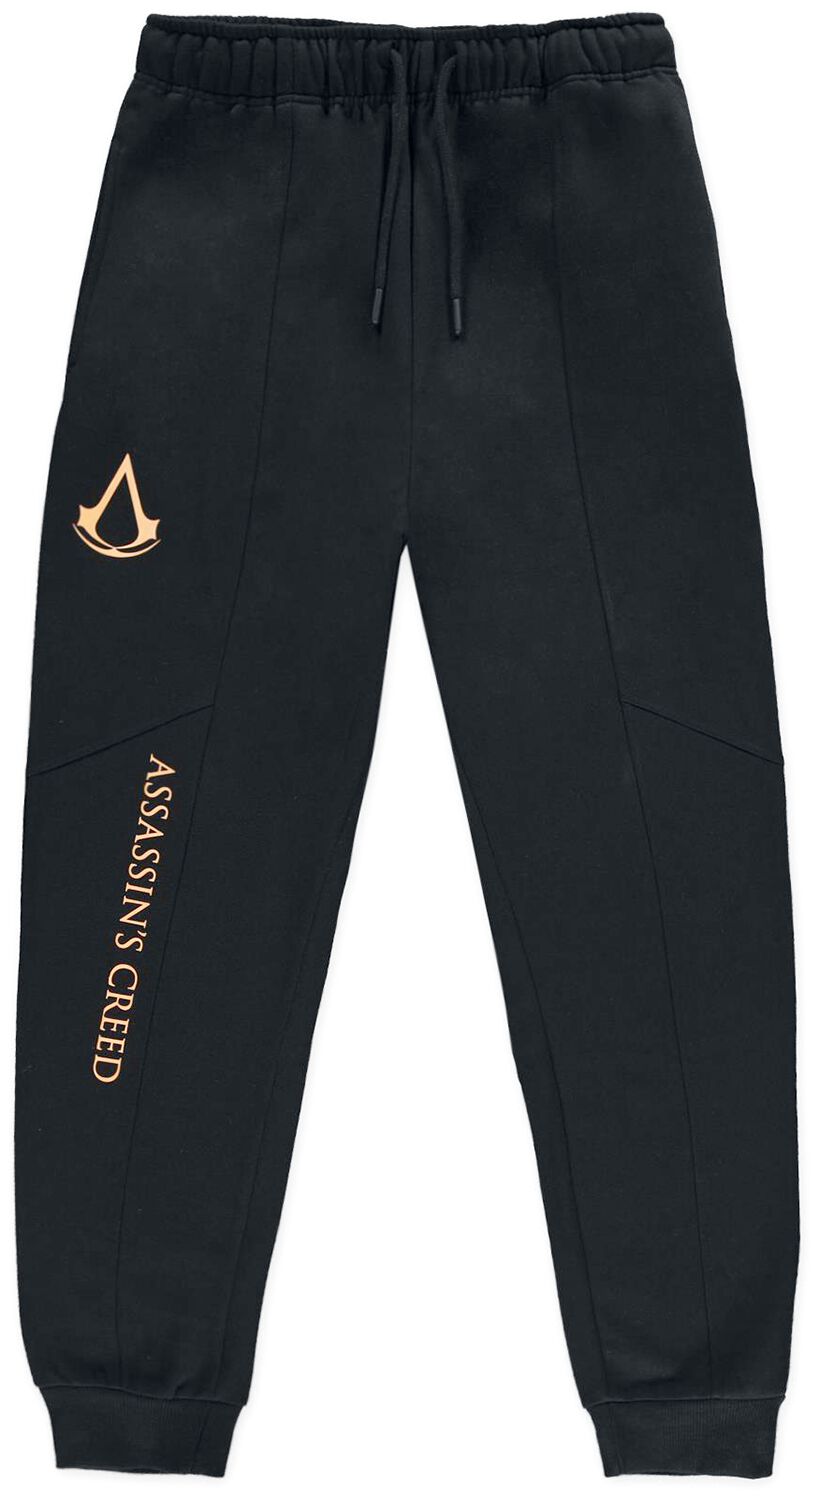 Assassin's Creed Assassin’s Creed - 15th anniversary Tracksuit Trousers black